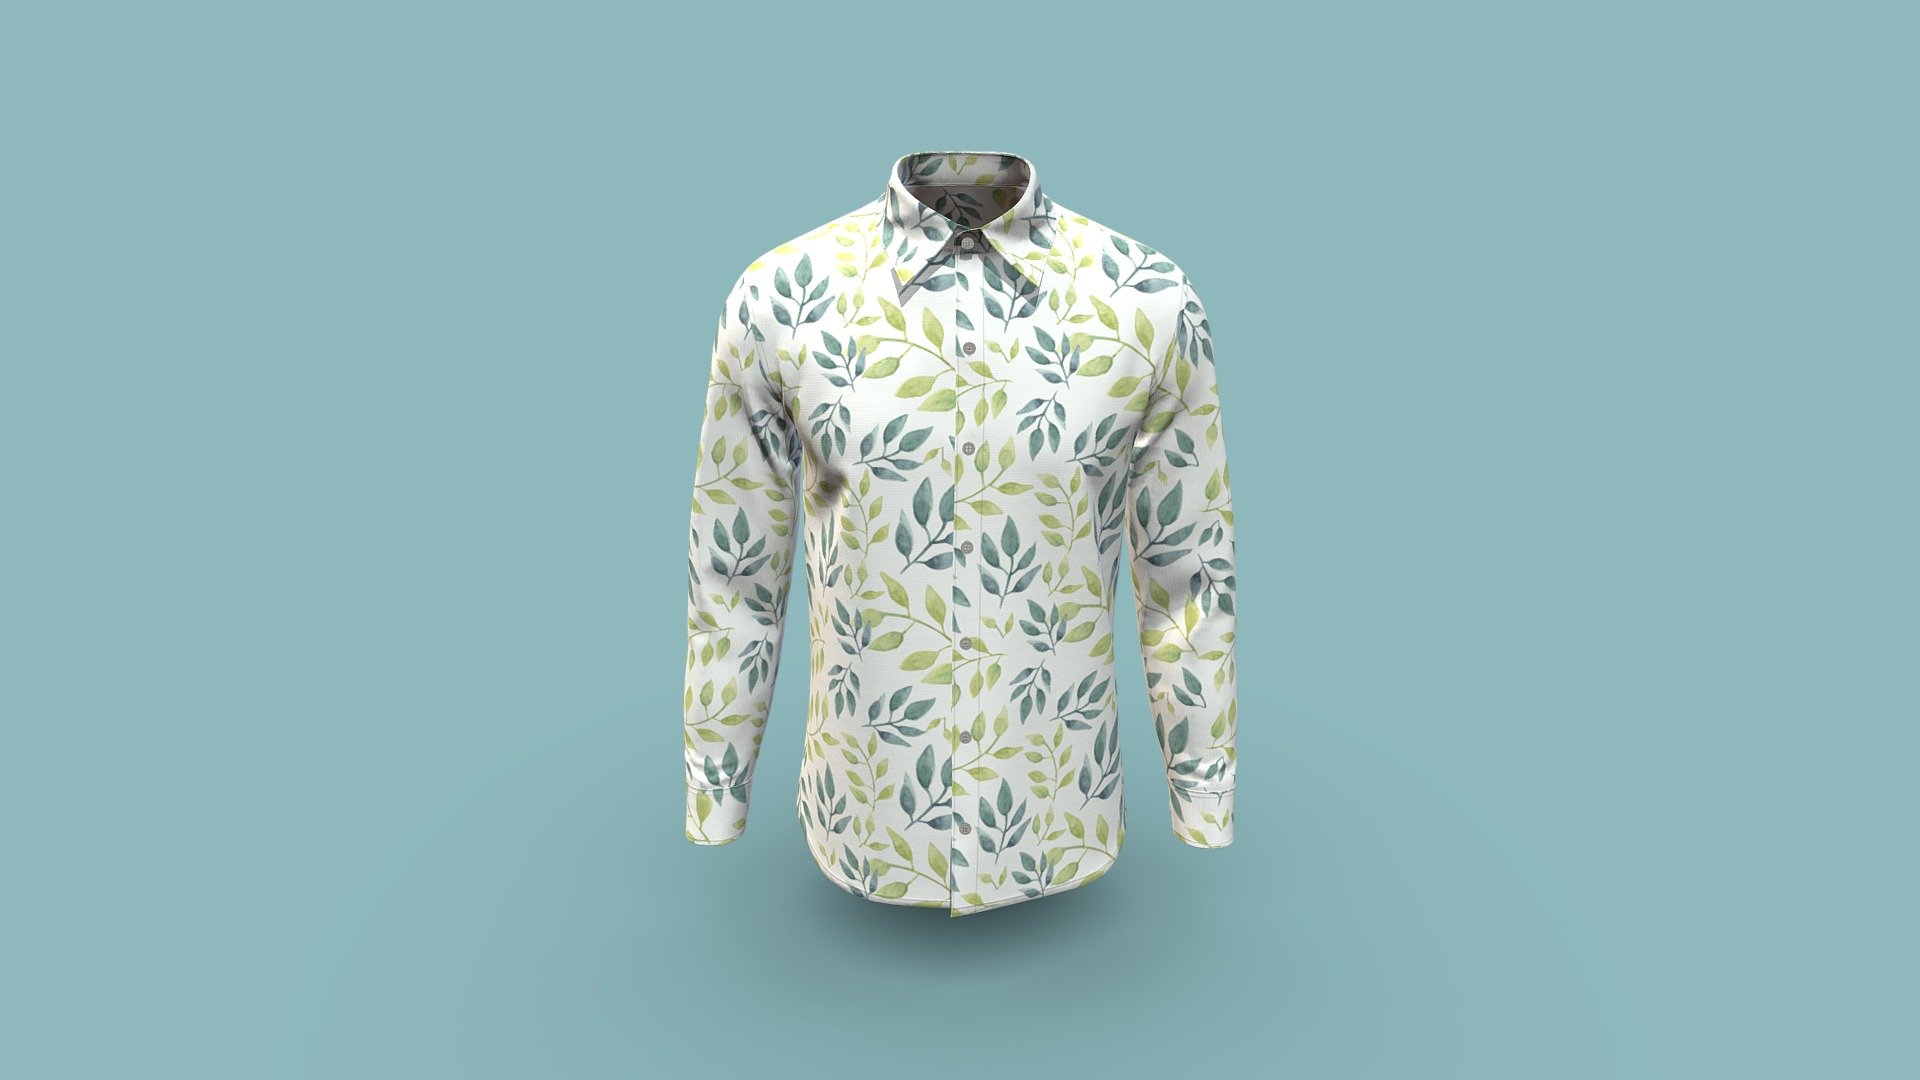 Cloth Title = Men's Hawaiian Slim Fit Shirt 

SKU = DG100072 

Category = Men 

Product Type = Shirt 

Cloth Length = Regular 

Body Fit = Slim Fit 

Occasion = Casual  

Sleeve Style = Long Sleeve 


Our Services: 

3D Apparel Design. 

OBJ,FBX,GLTF Making with High/Low Poly. 

Fabric Digitalization. 

Mockup making. 

3D Teck Pack. 

Pattern Making. 

2D Illustration. 

Cloth Animation and 360 Spin Video


Contact us:- 

Email: info@digitalfashionwear.com 

Website: https://digitalfashionwear.com 

WhatsApp No: +8801759350445 


We designed all the types of cloth specially focused on product visualization, e-commerce, fitting, and production. 

We will design: 

T-shirts 

Polo shirts 

Hoodies 

Sweatshirt 

Jackets 

Shirts 

TankTops 

Trousers 

Bras 

Underwear 

Blazer 

Aprons 

Leggings 

and All Fashion items. 





Our goal is to make sure what we provide you, meets your demand 3d model